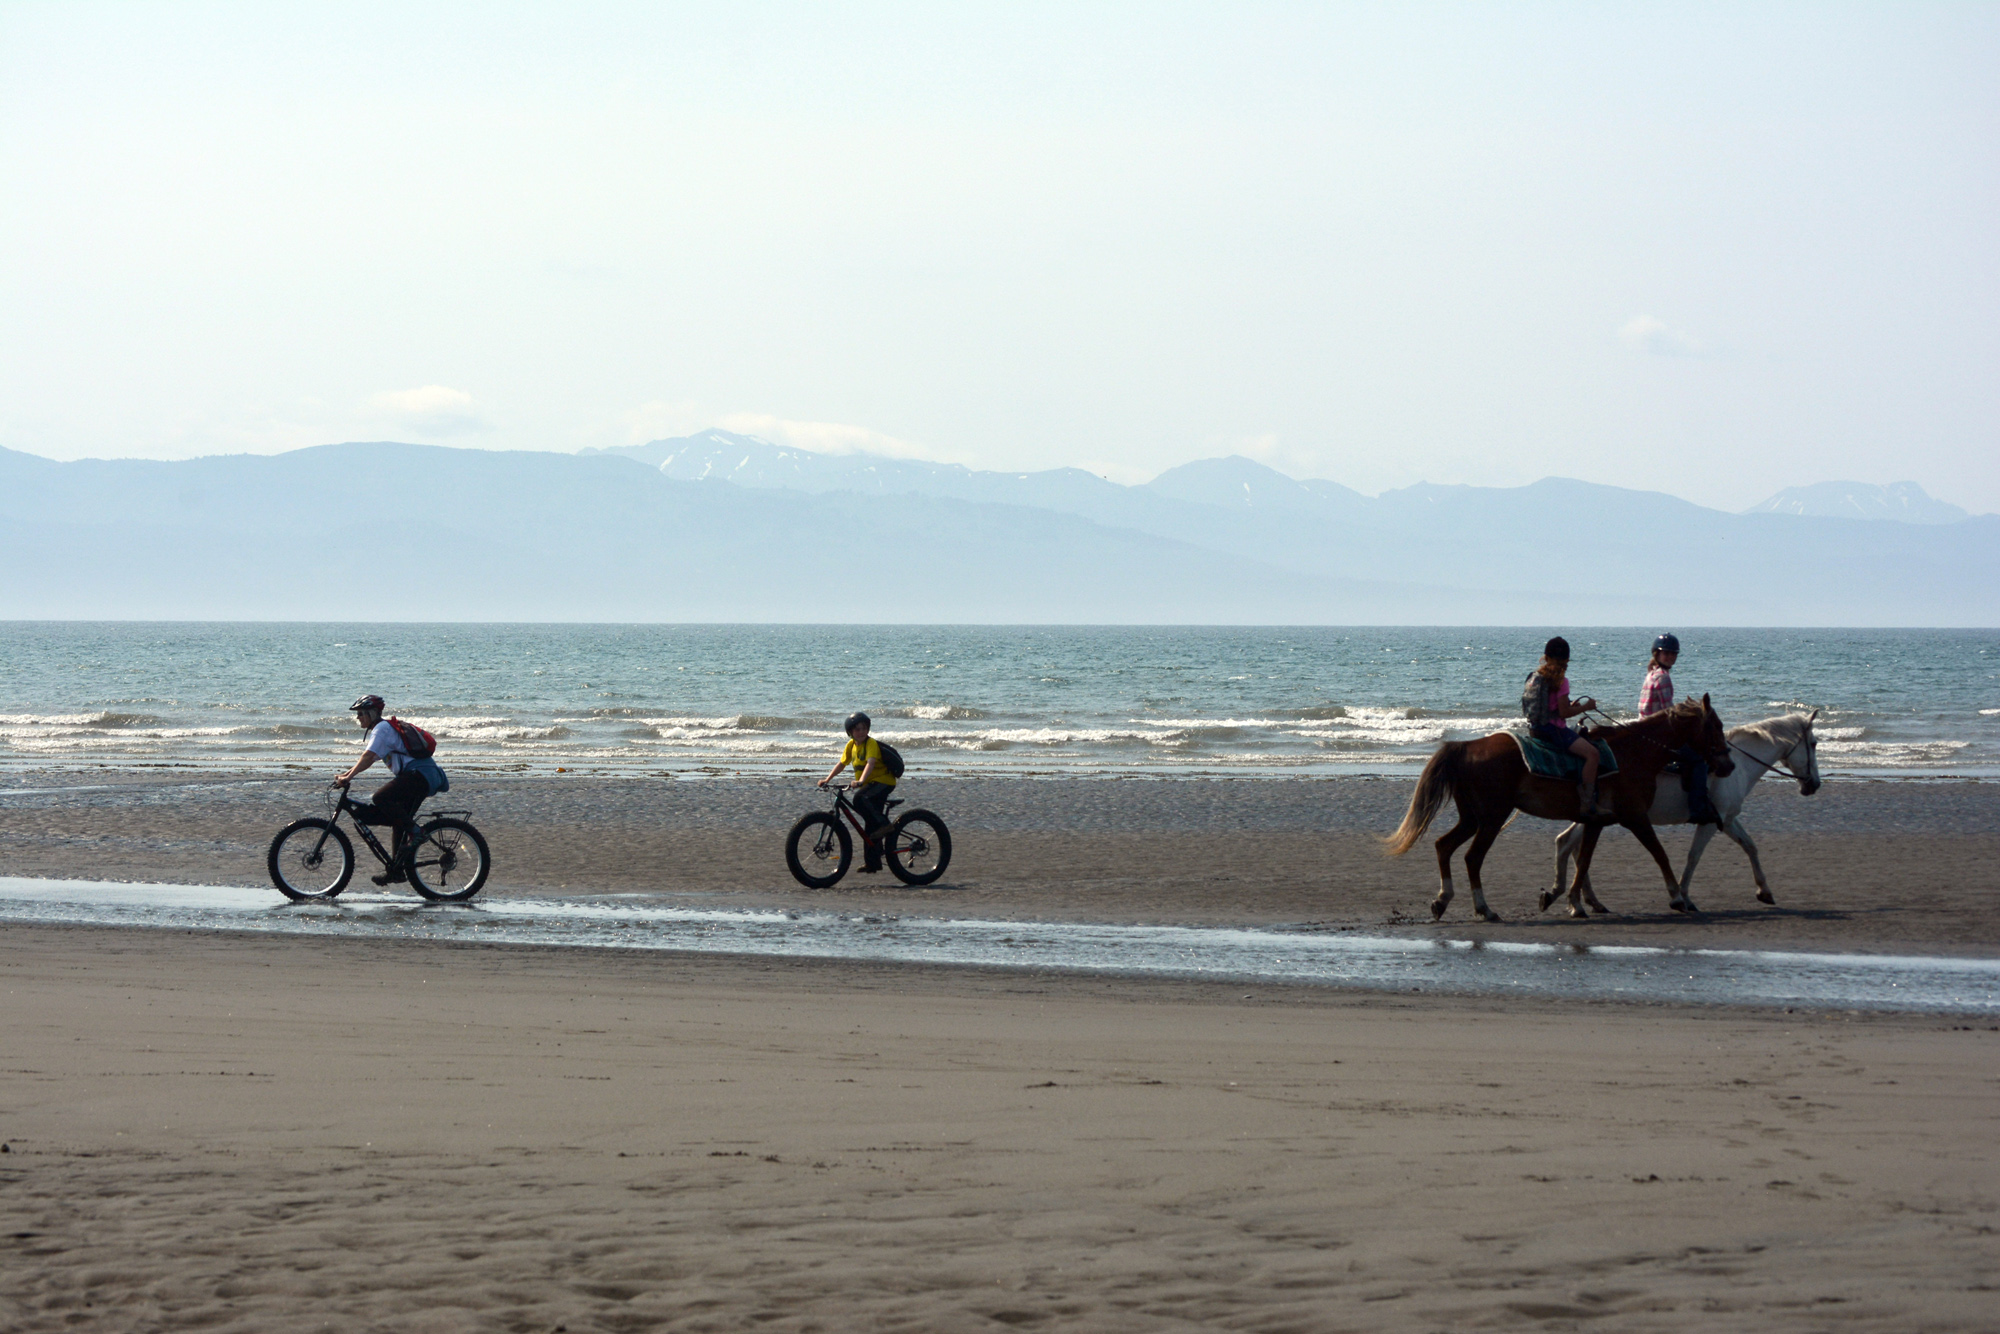 Bicyclists and horse riders pass each other near Mariner Park beach on the Homer Spit in late June. On Monday at its 6 p.m. regular meeting, the Homer City Council will go from placid tidepools to heavy surf when it considers an ordinance regulating motorized vehicle access to Bishop’s Beach and the Homer Spit. Horse riding and bike riding would not be restricted under recommendations by the Parks and Recreation Advisory Commission.-Photo by Michael Armstrong, Homer News